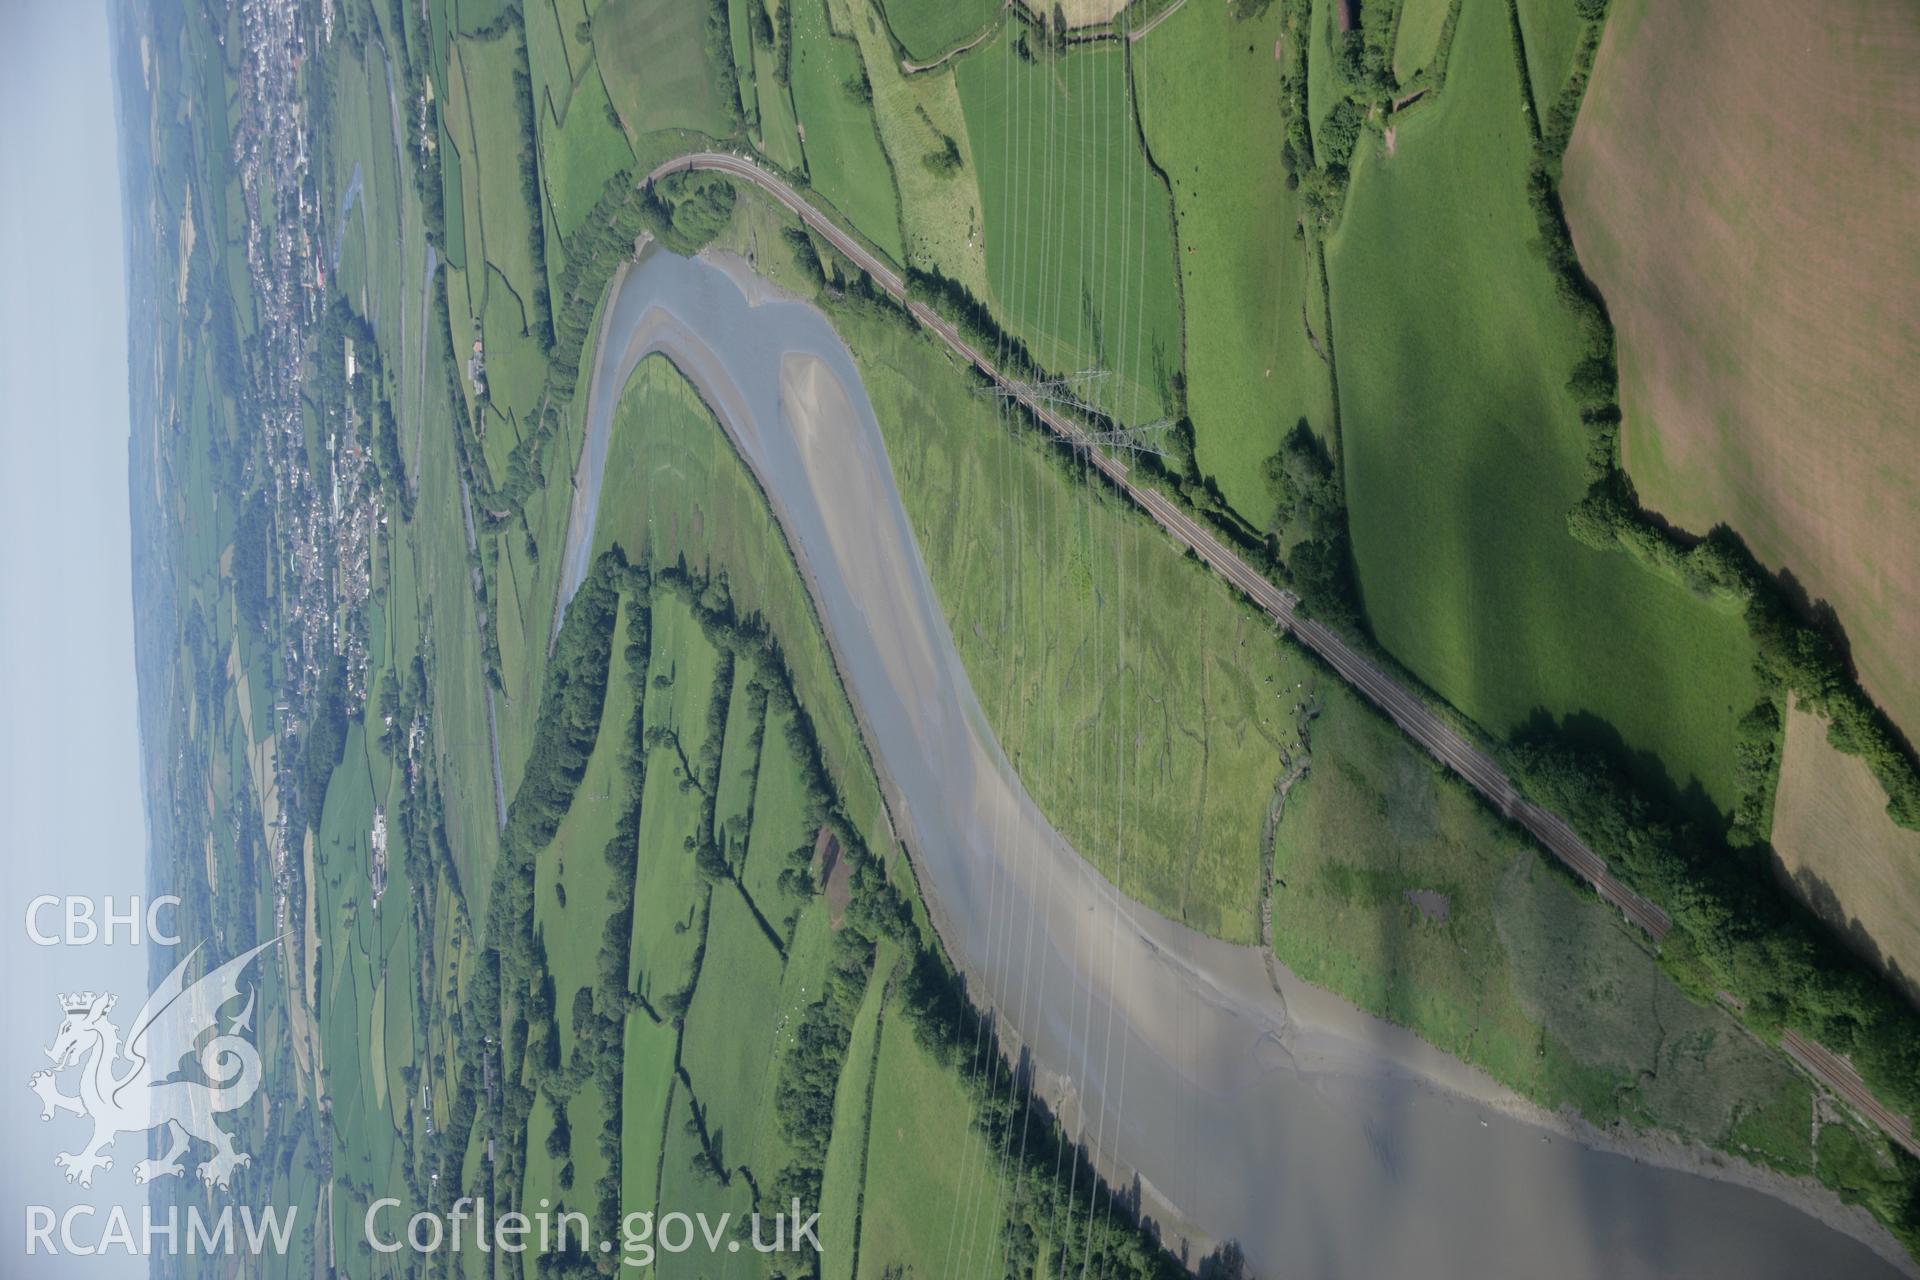 RCAHMW colour oblique aerial photograph showing landscape view of Afon Twyi, looking north to Carmarthen. Taken on 09 June 2005 by Toby Driver